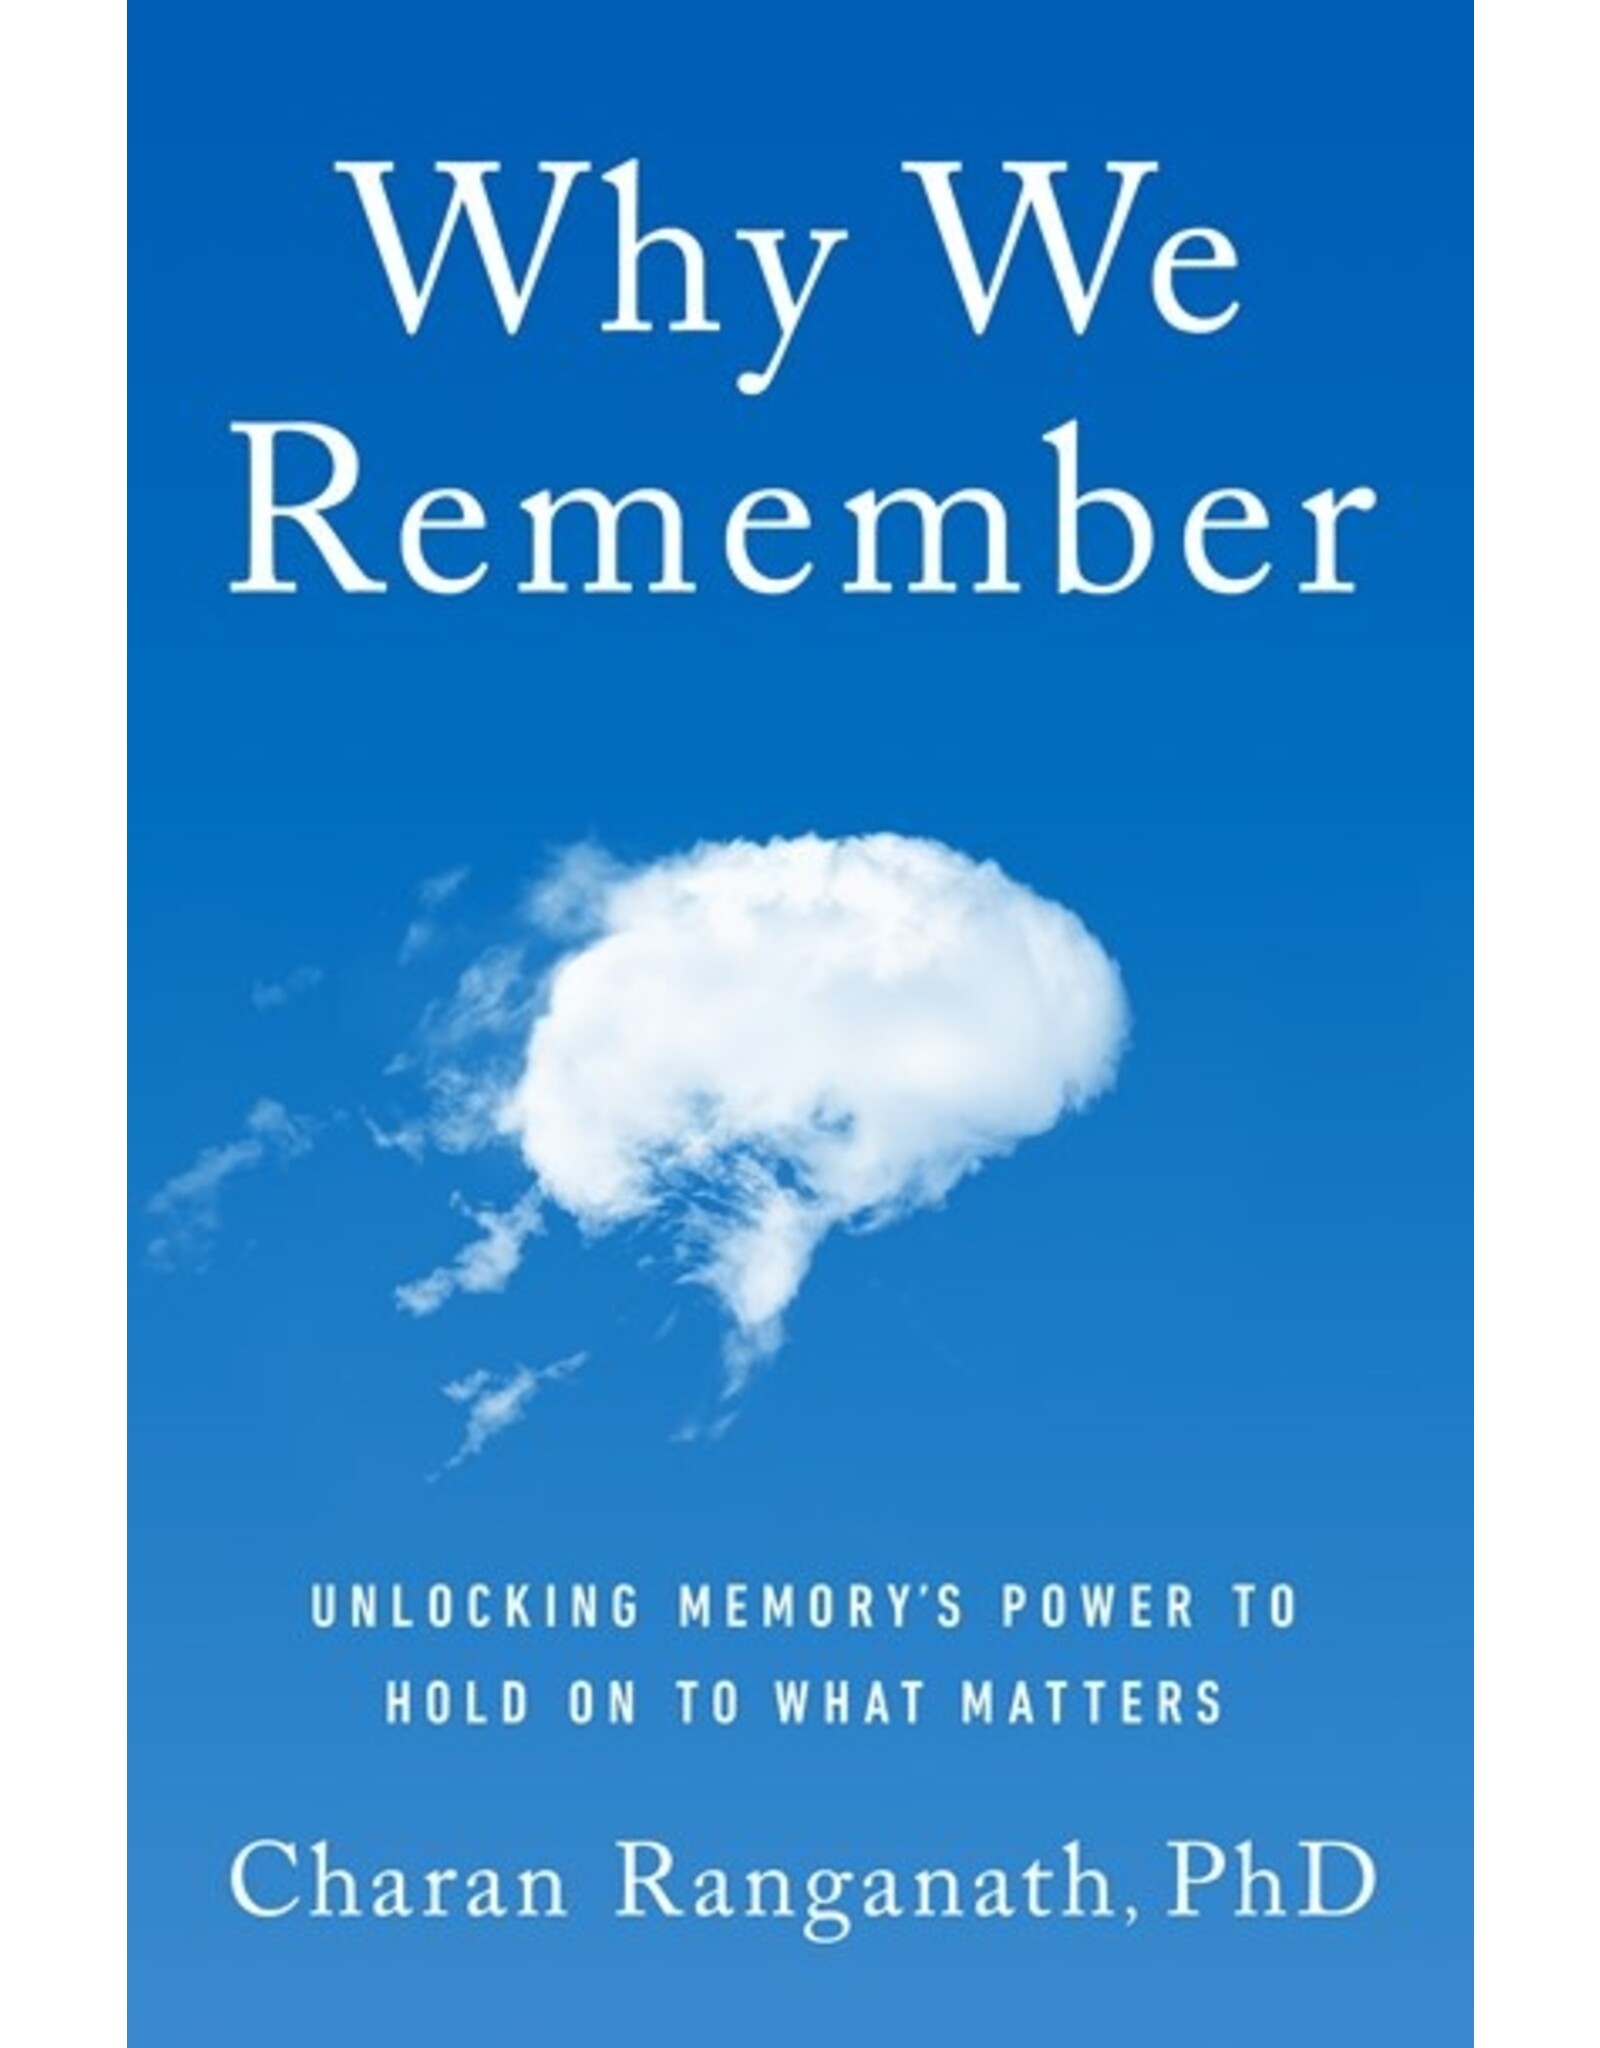 Books Why We Remember: Unlocking Memory's Power to Hold on to What Matters by Charan Ranganath, PhD